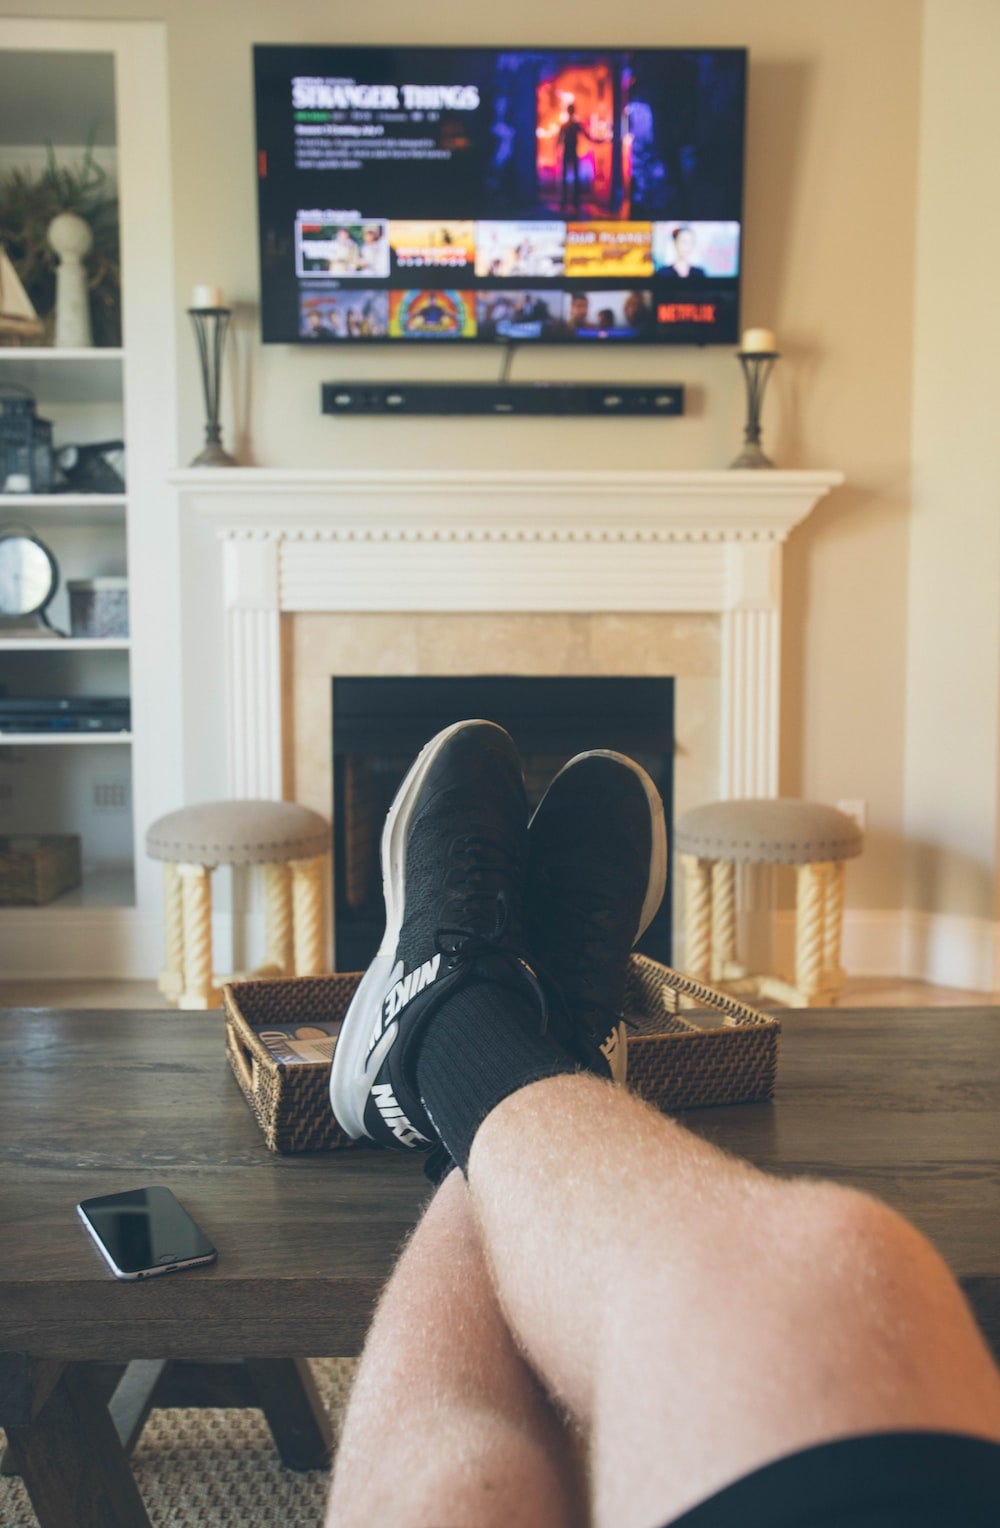 First-person POV: A man watching TV, pair of feet and a phone on the table.